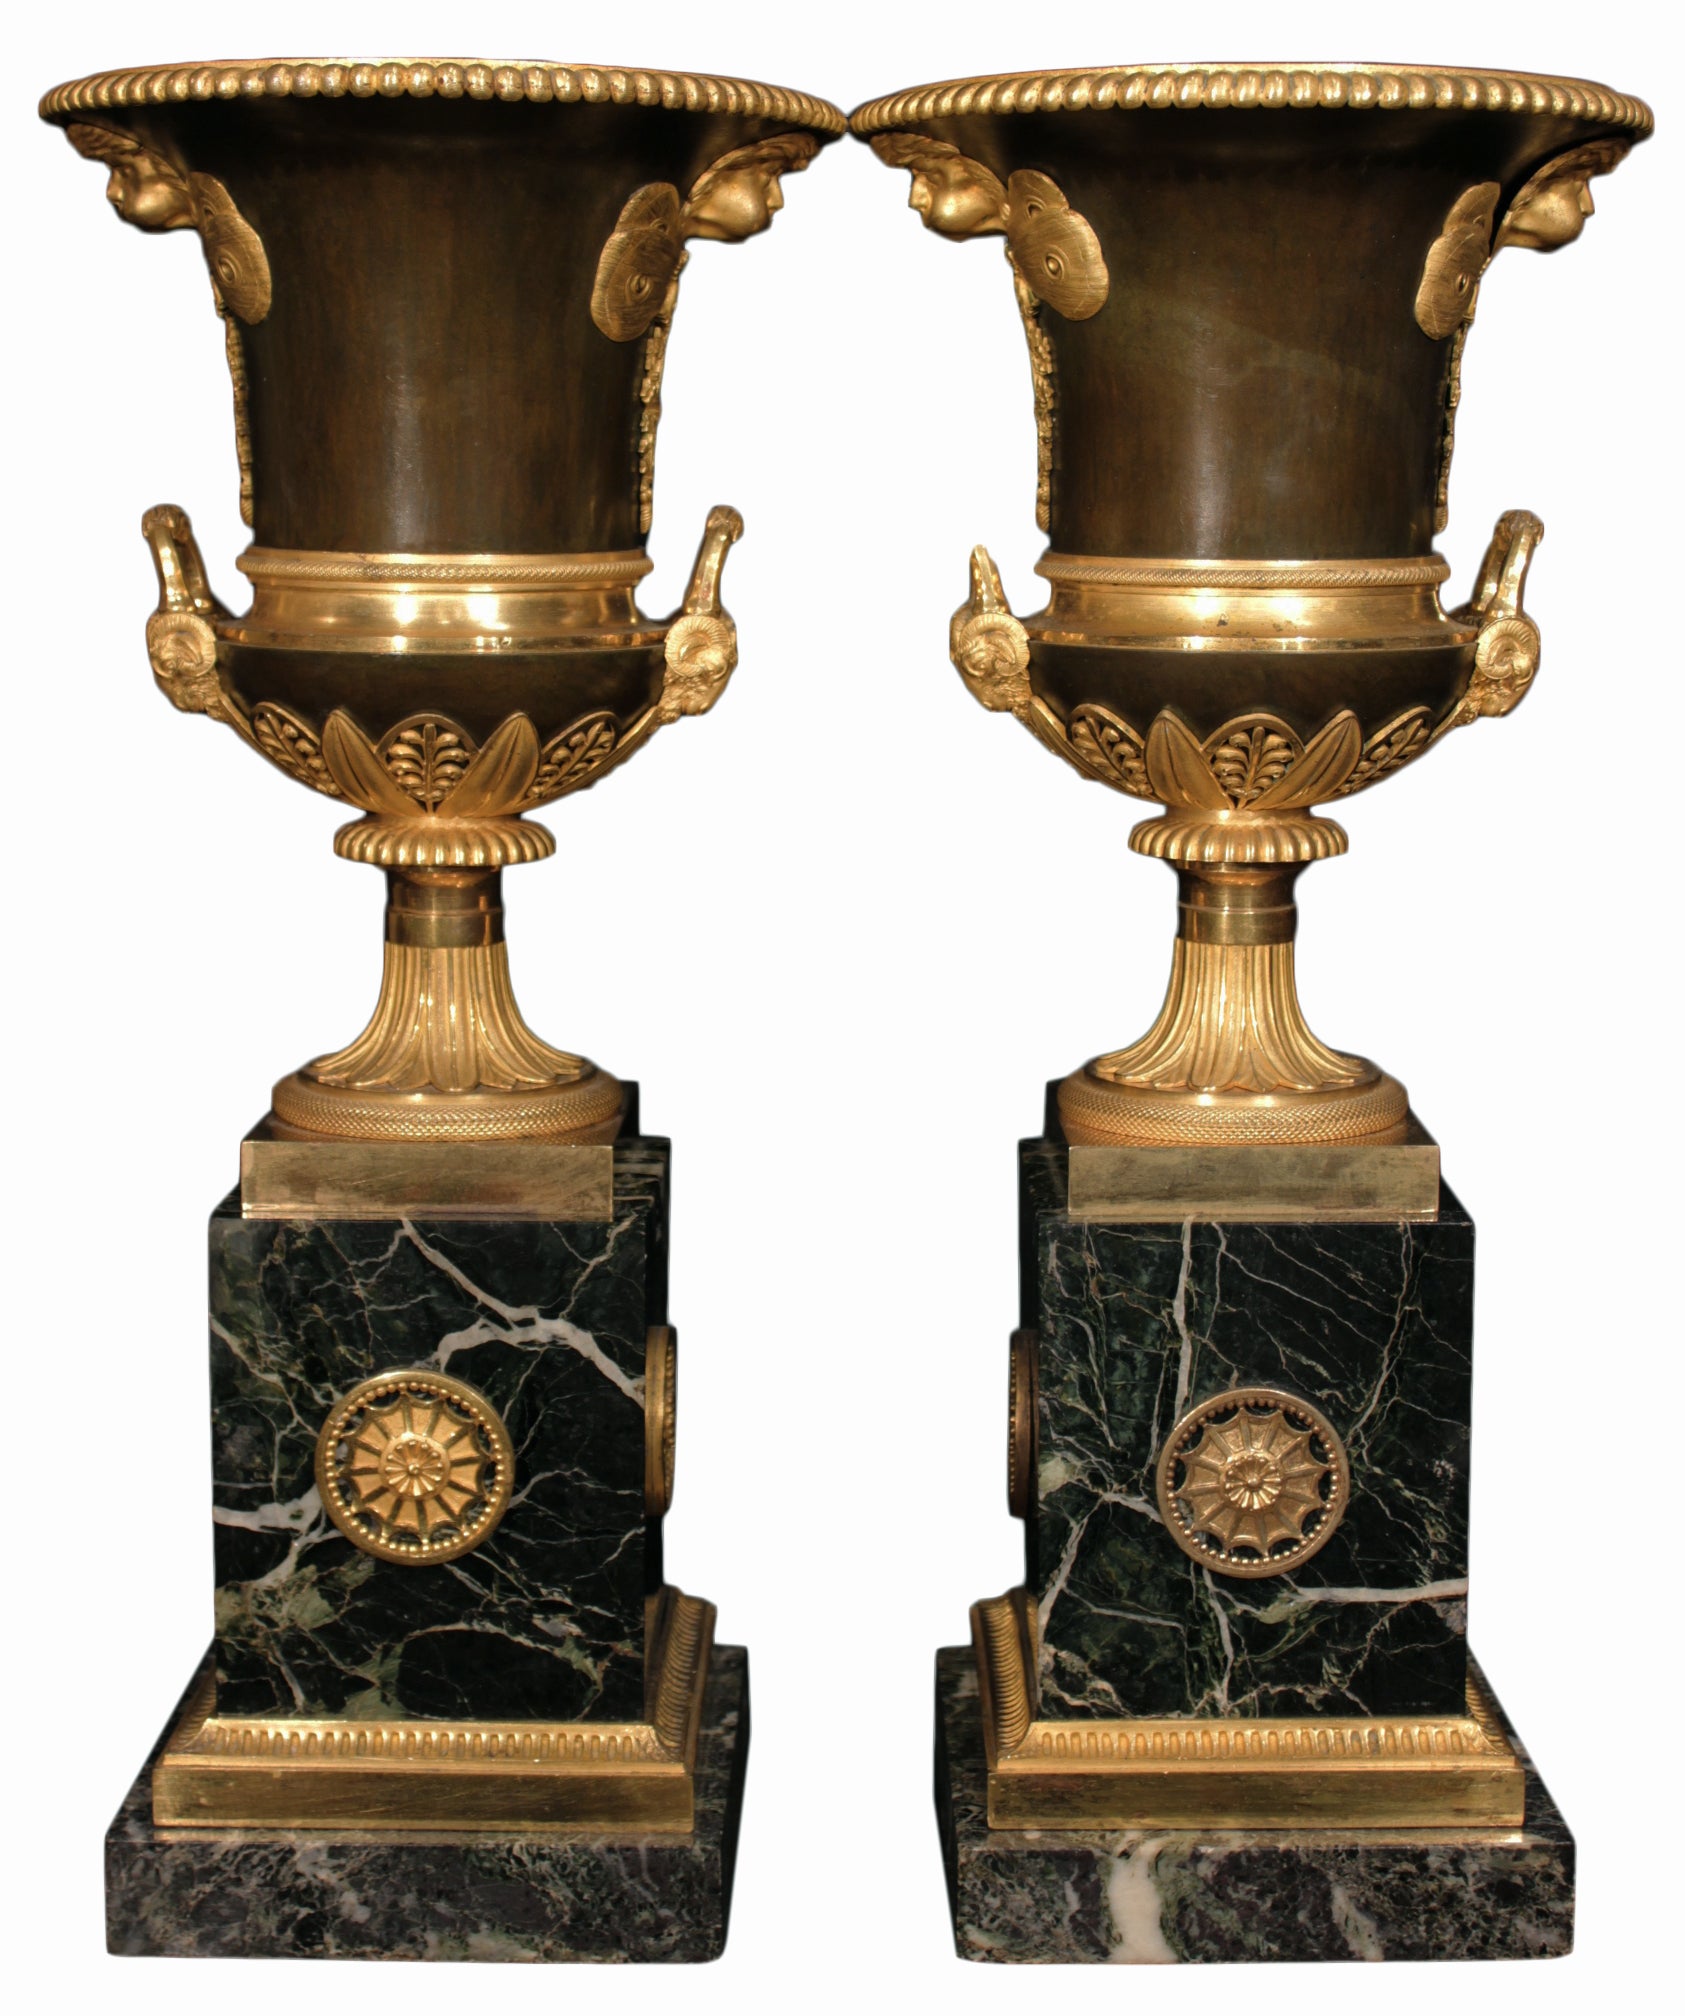 French 1st Empire period circa 1805-1810 patinated bronze urns